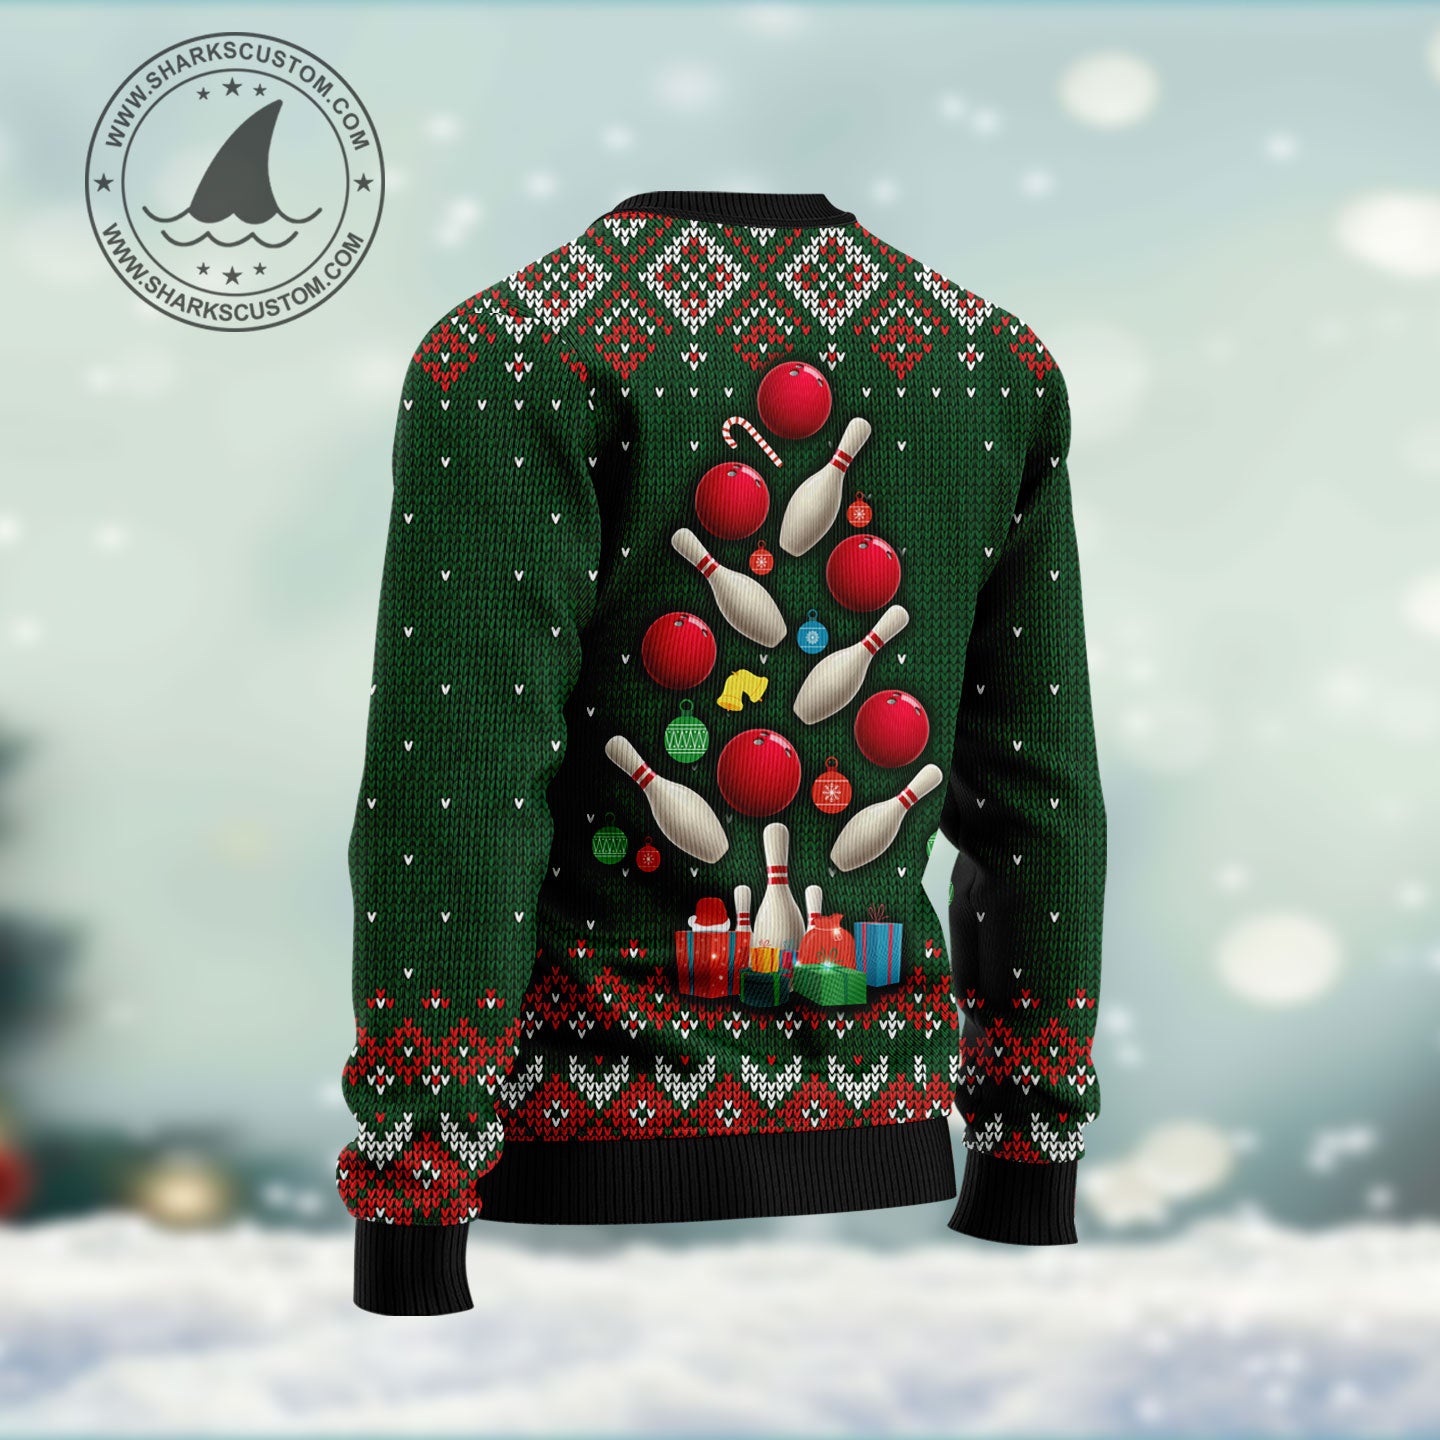 Bowling Rollin' With My Snowmies HT031109 Ugly Christmas Sweater unisex womens & mens, couples matching, friends, funny family sweater gifts (plus size available)